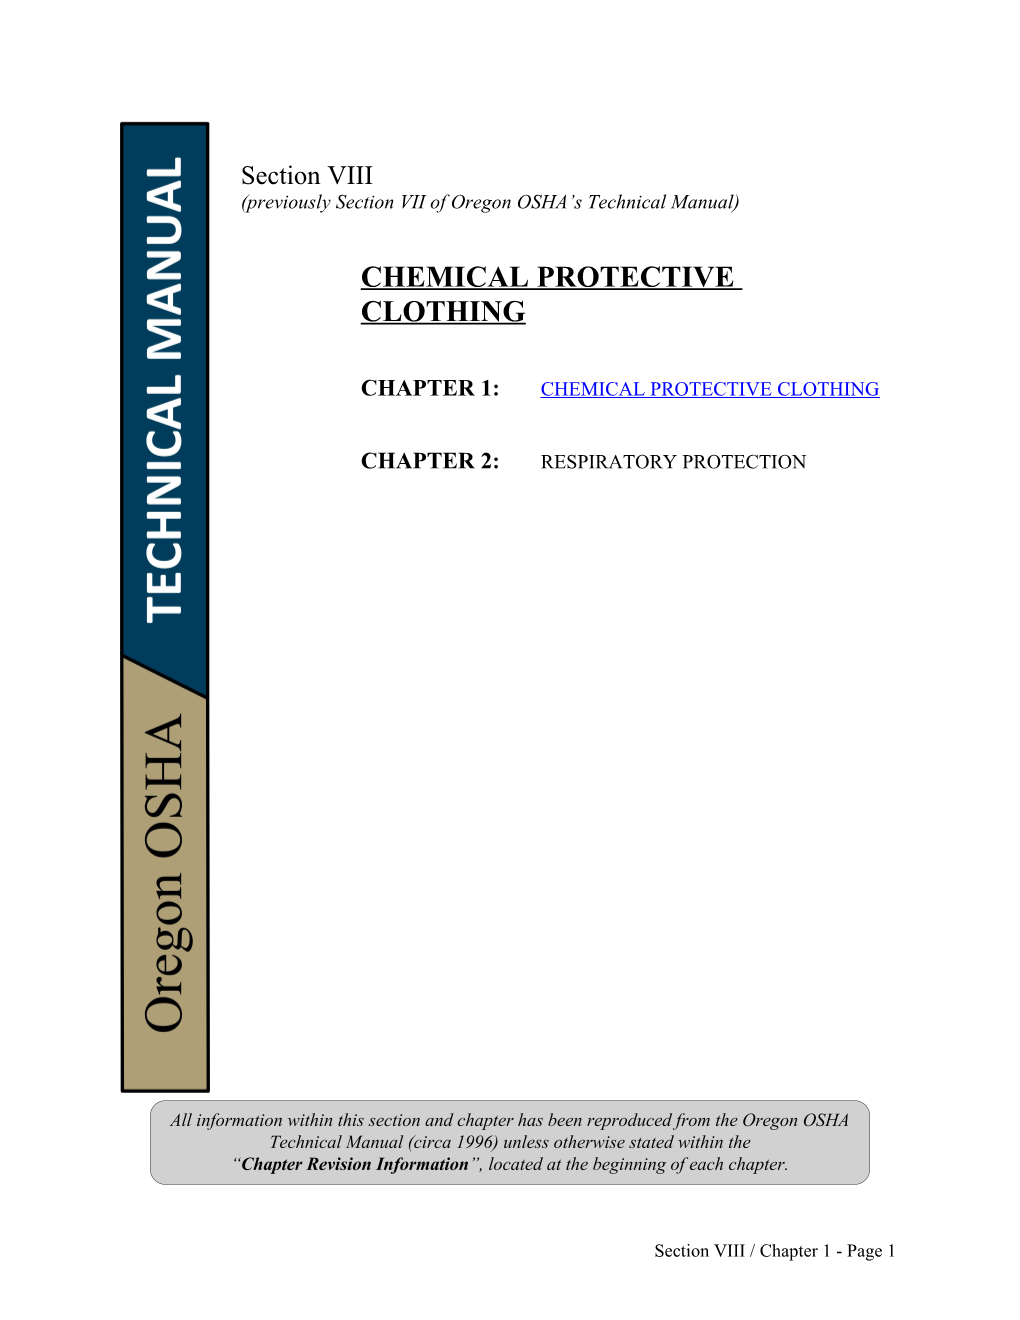 Technical Manual, Sec. 8, Ch. 1: Chemical Protective Clothing